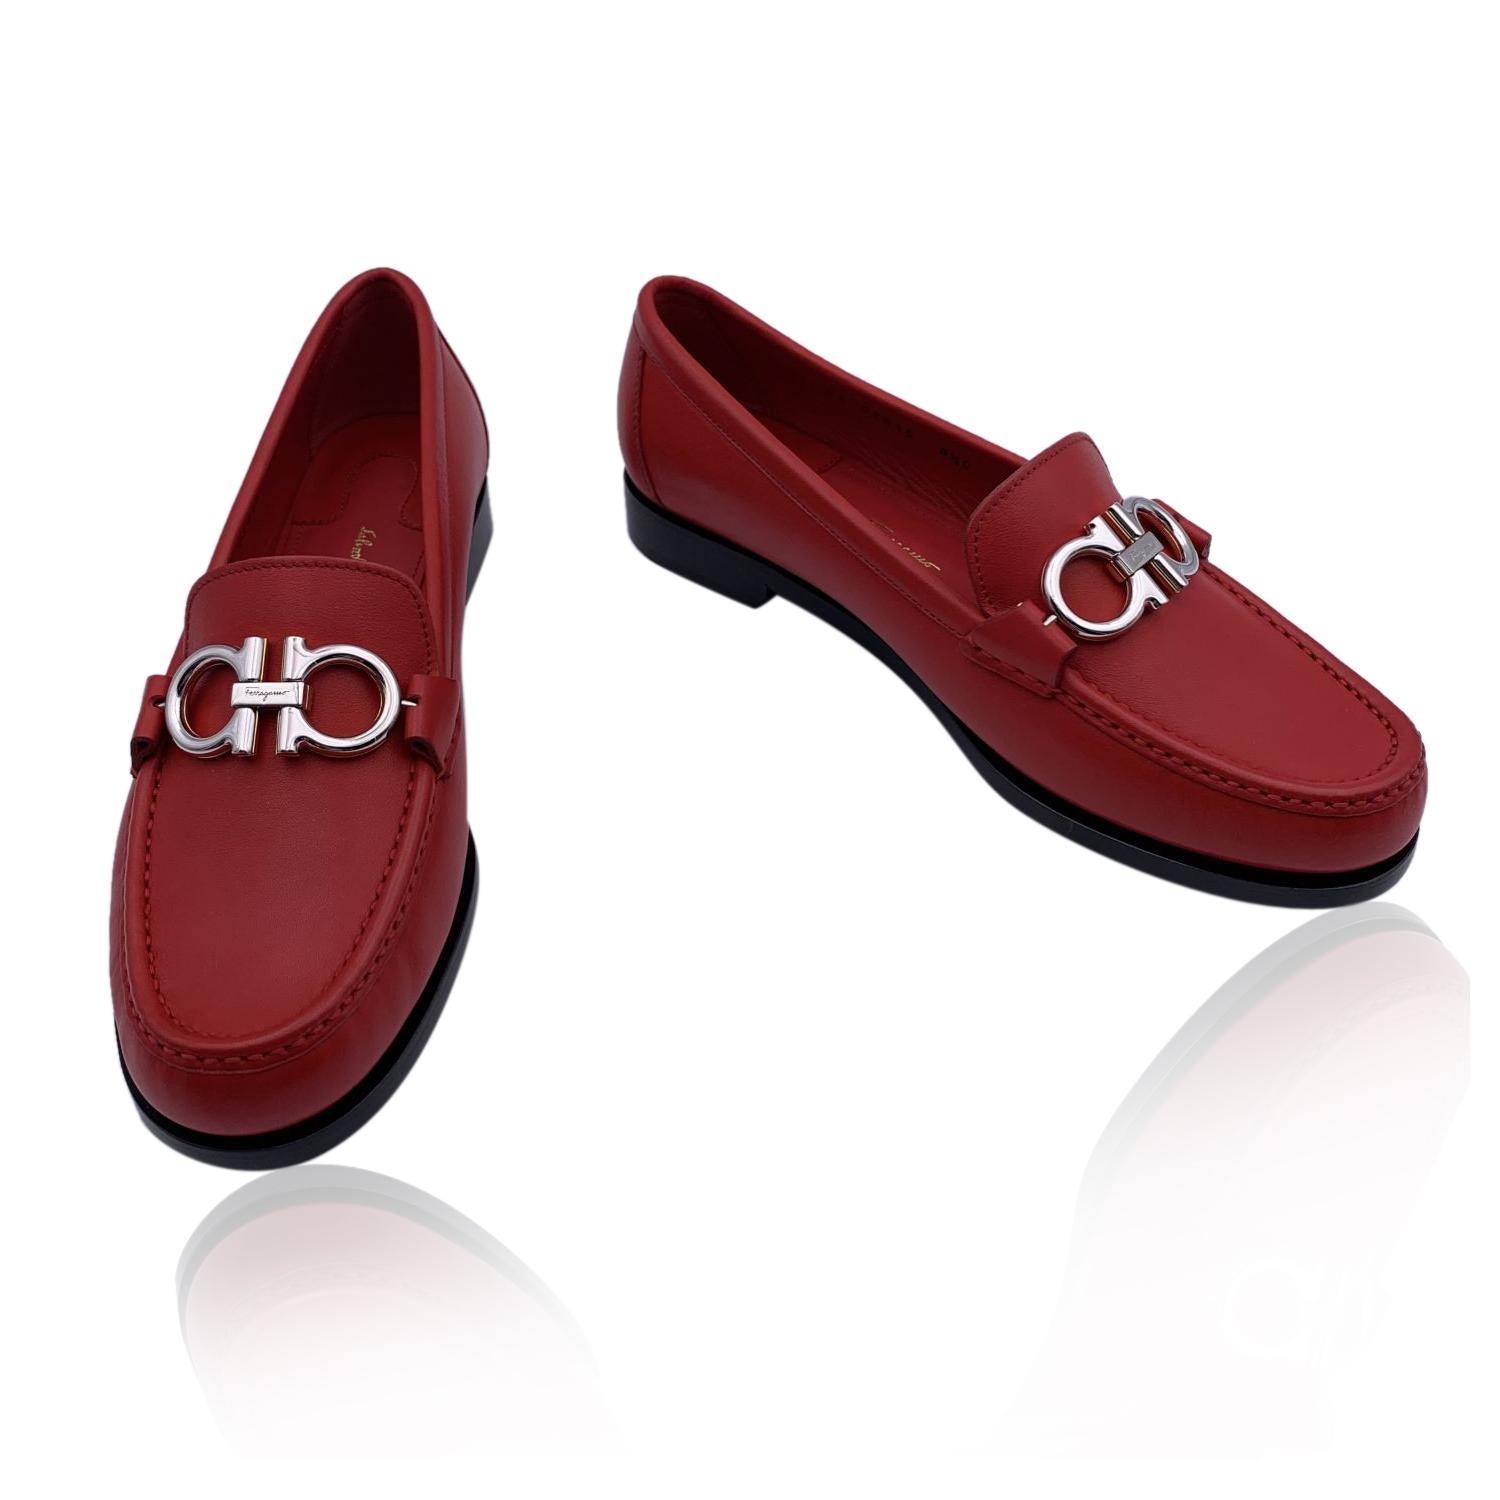 Beautiful Salvatore Ferragamo 'Rolo' Moccassins Loafers Shoes. Crafted in red calf leather. They feature a round toe, silver metal Gancini detailing on the toes and slip-on design. Leather sole. Padded insole. Heels height: 1cm. Made in Italy. Size: